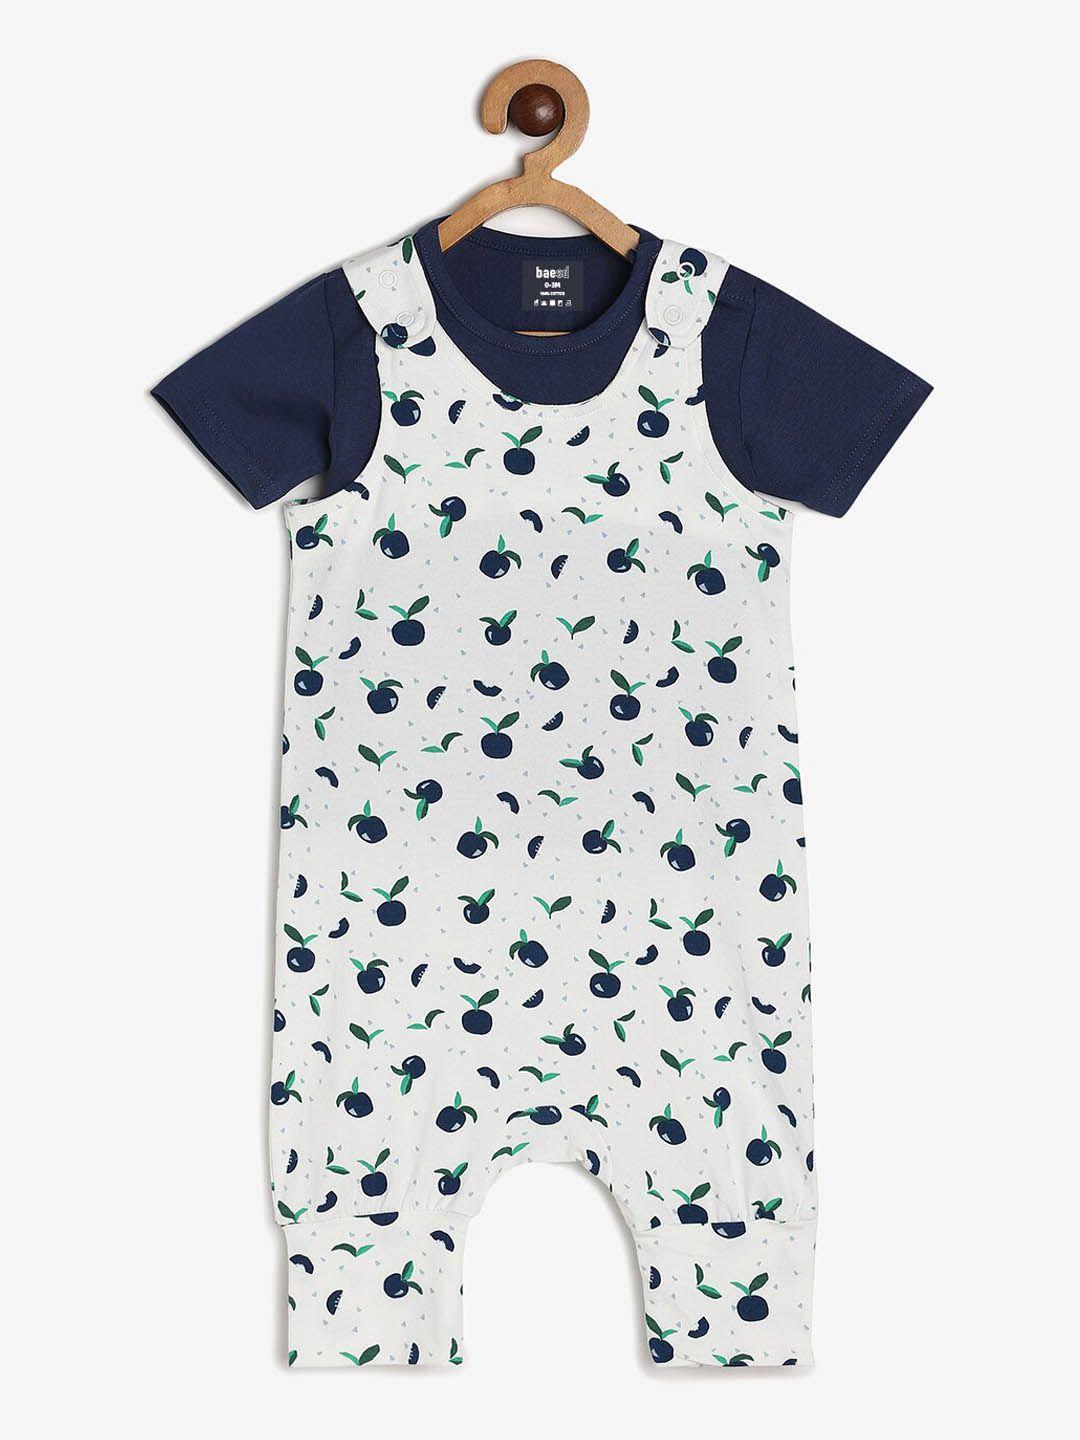 baesd infant conversational printed pure cotton dungaree